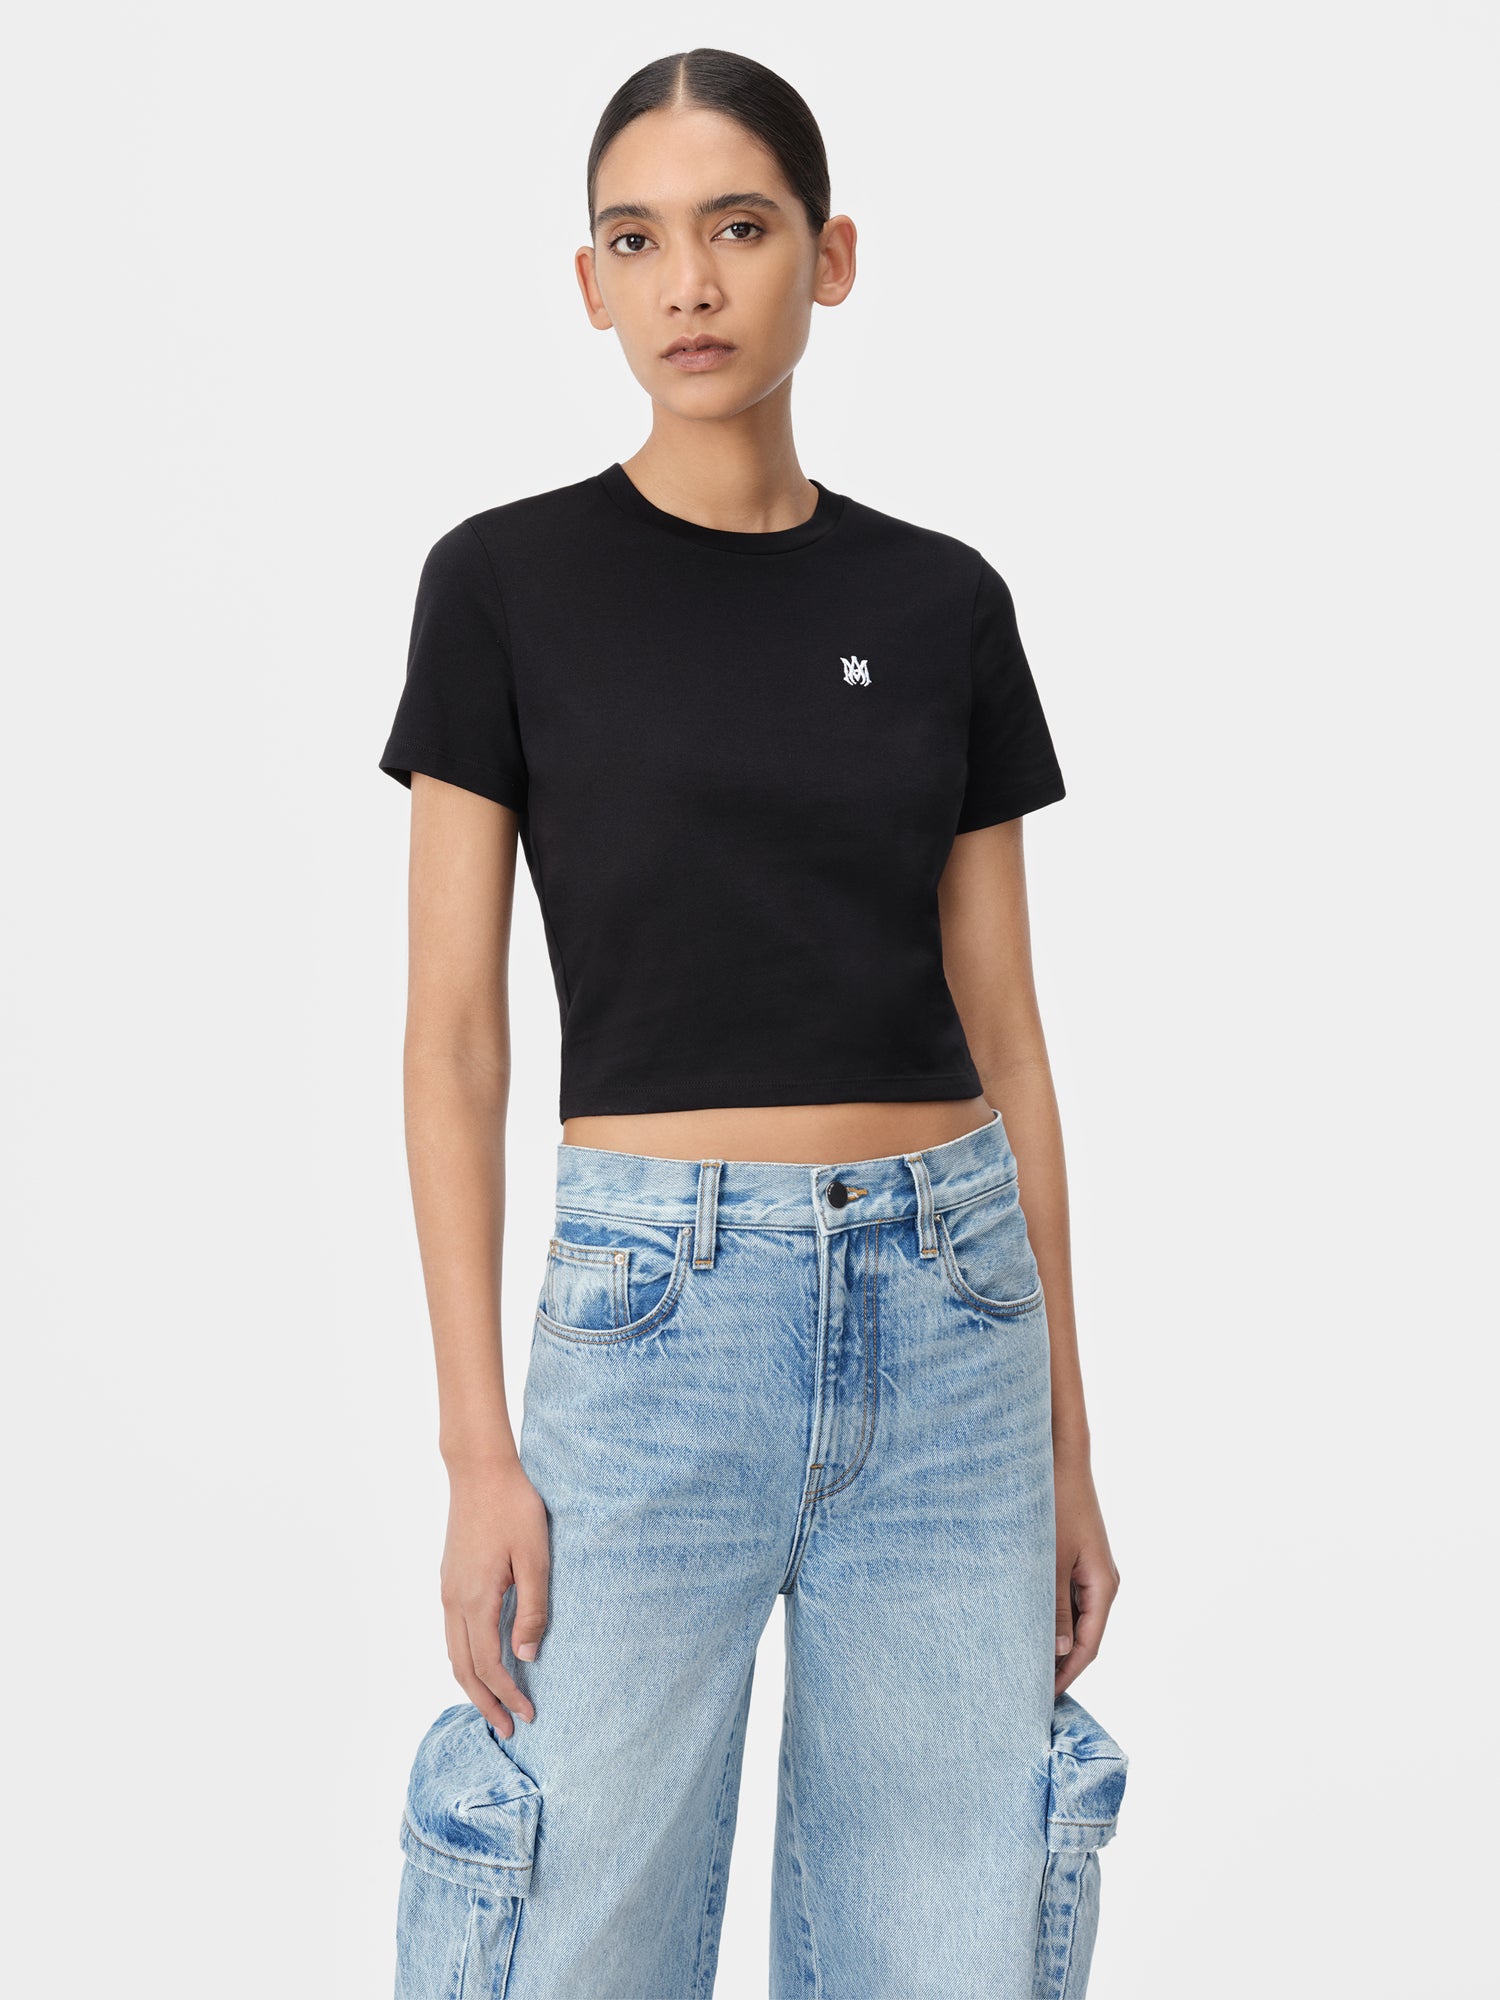 Product WOMEN - MA EMBROIDERED BABY TEE - Black featured image